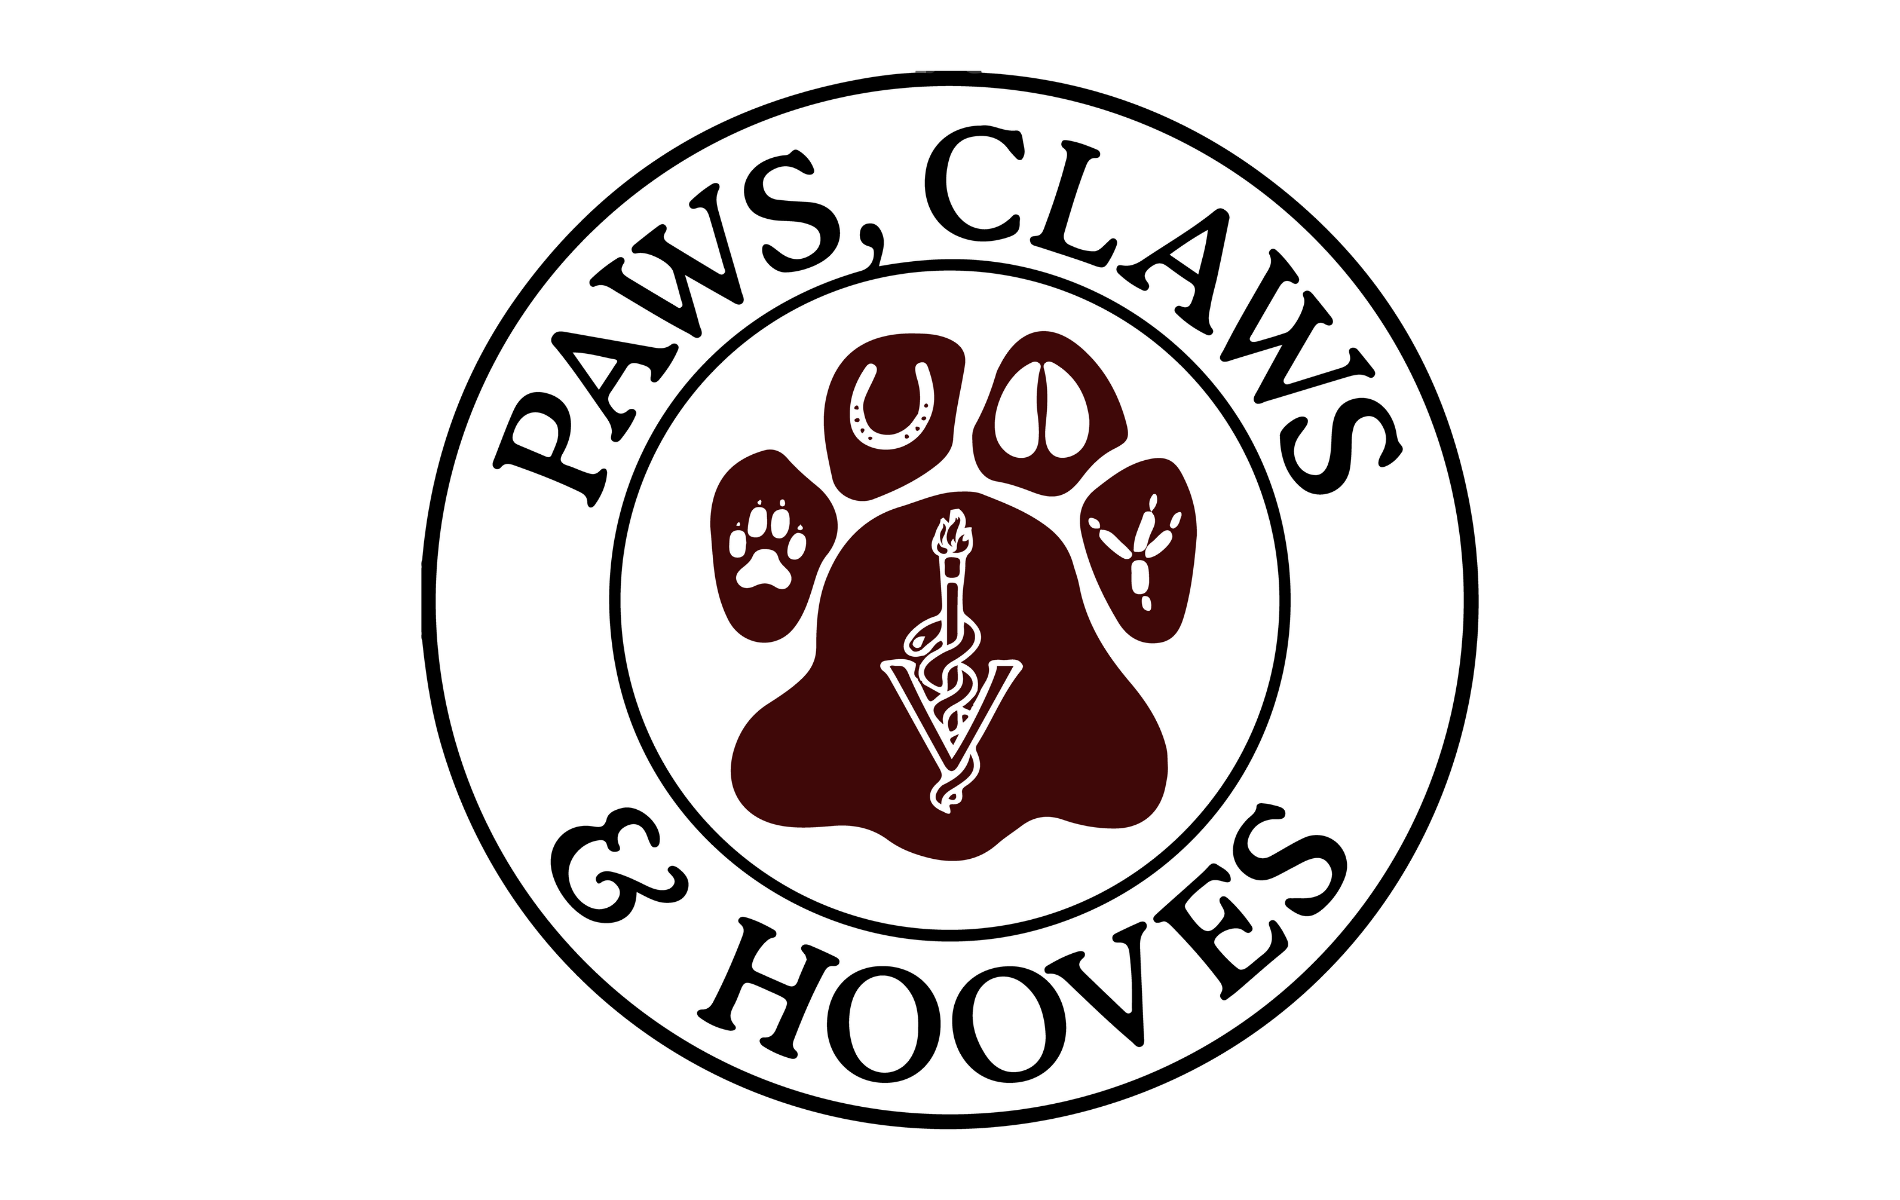 Paws, Claws & Hooves Veterinary Center